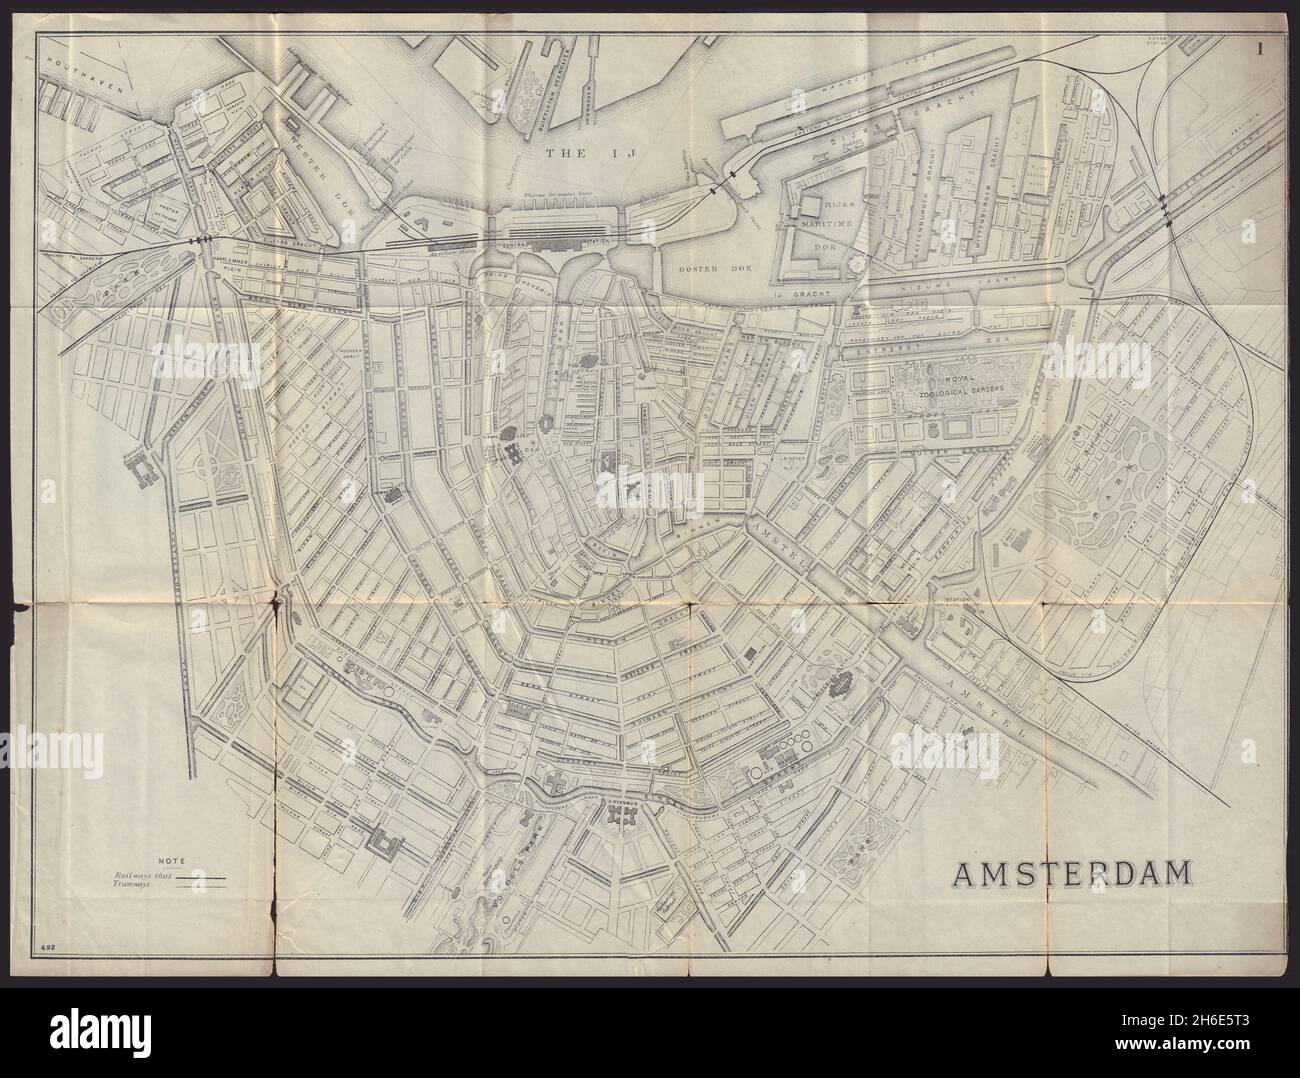 AMSTERDAM antique town plan city map. Netherlands. BRADSHAW 1892 old Stock Photo